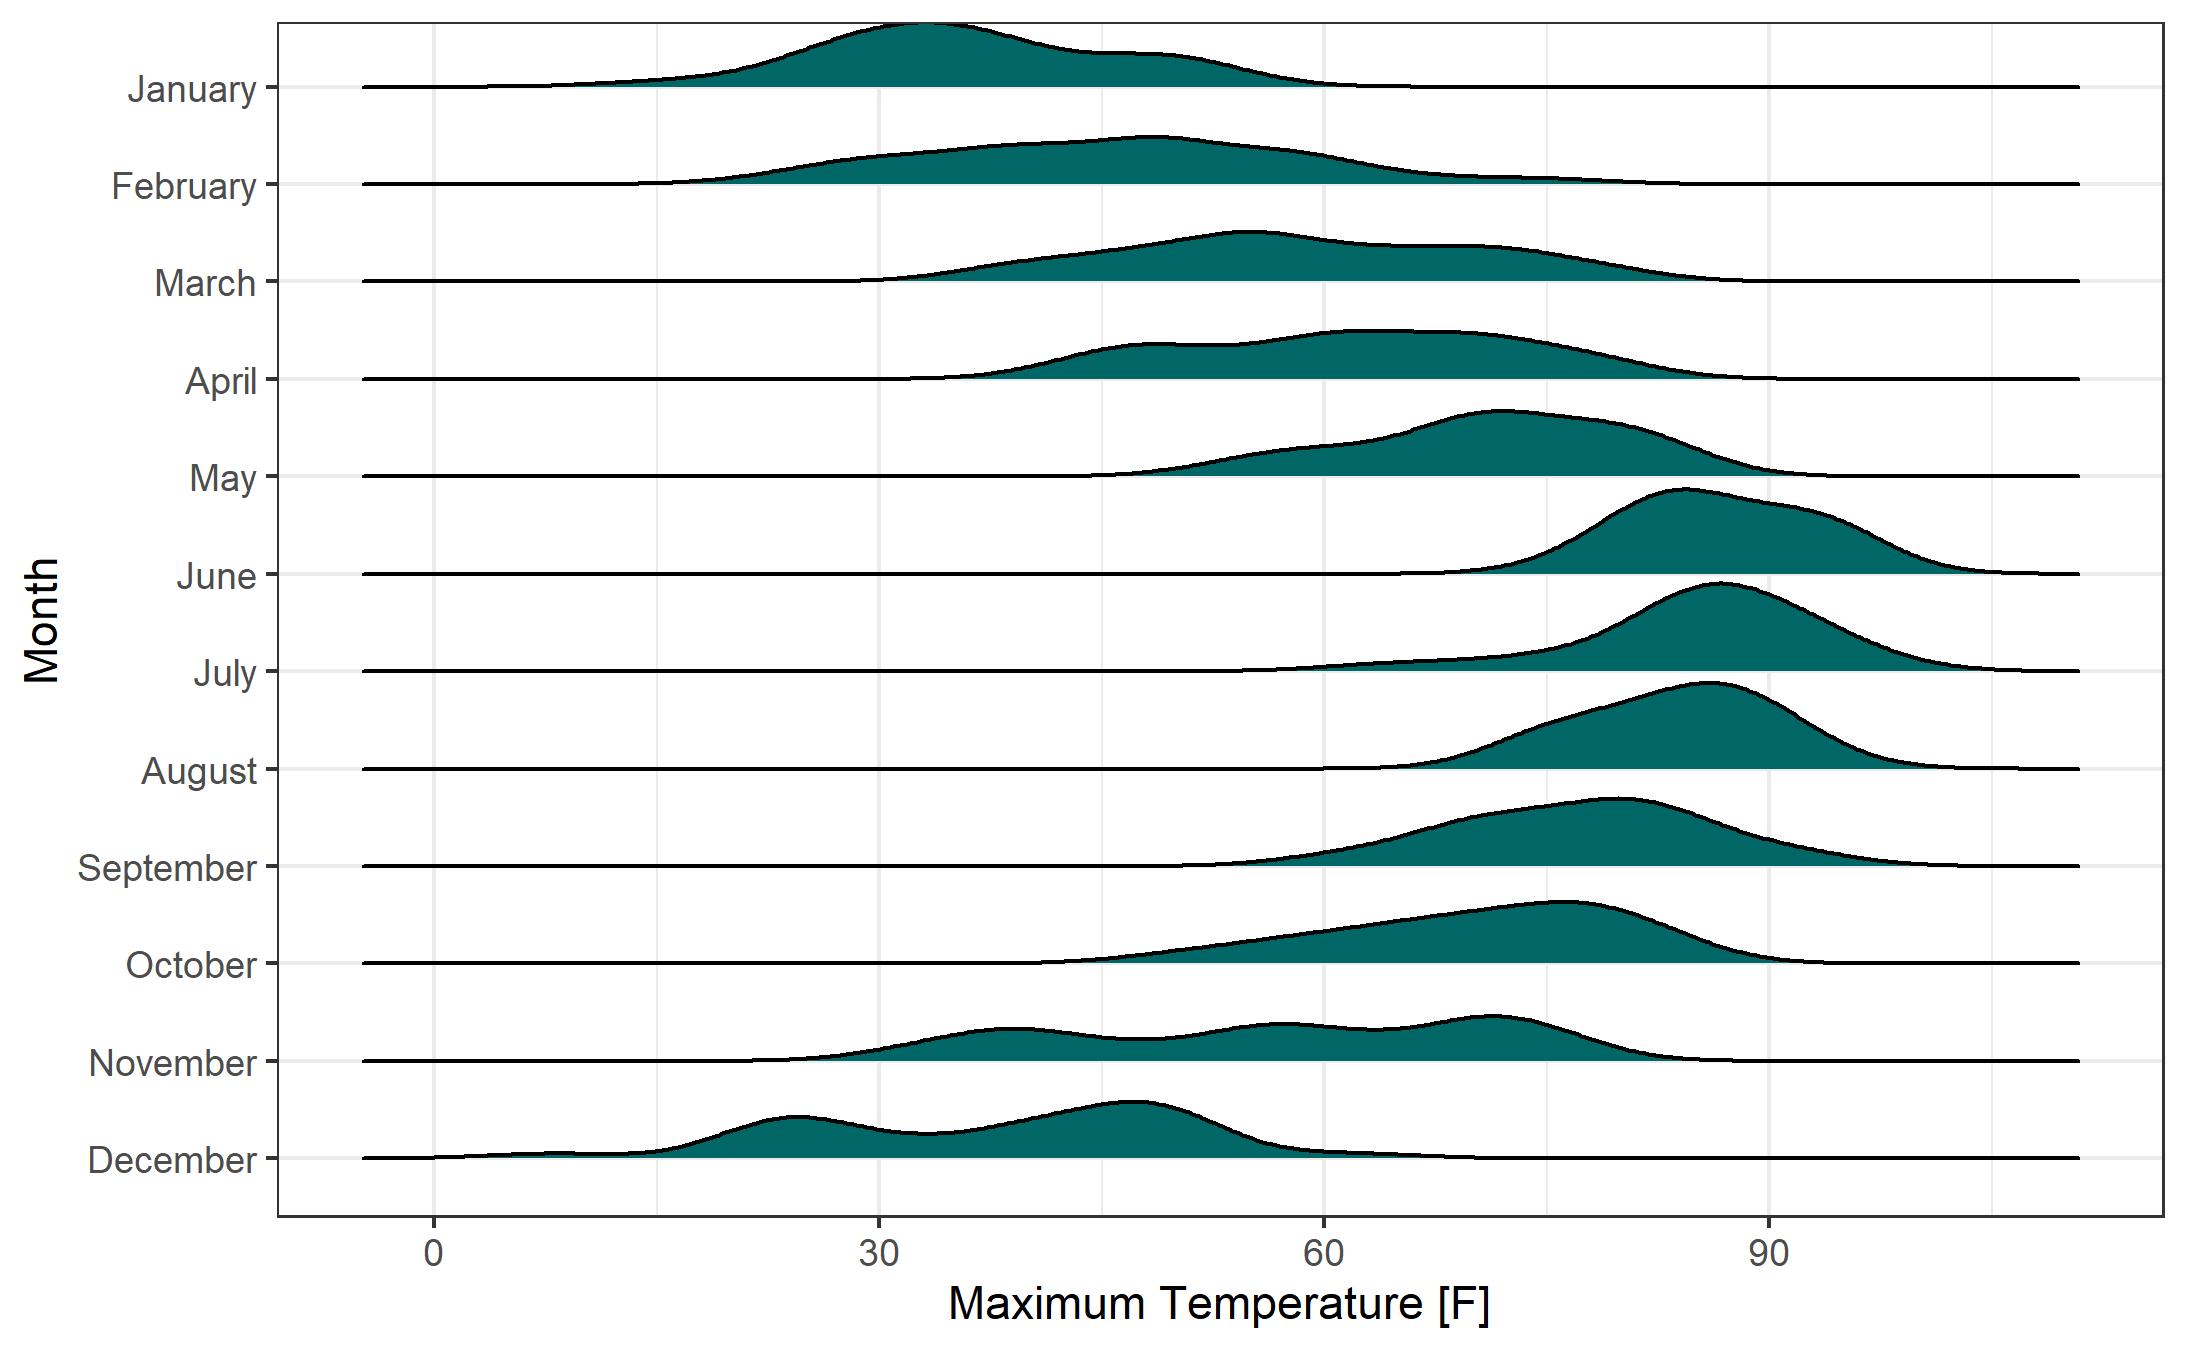 Temperature Smoothed Density Curve